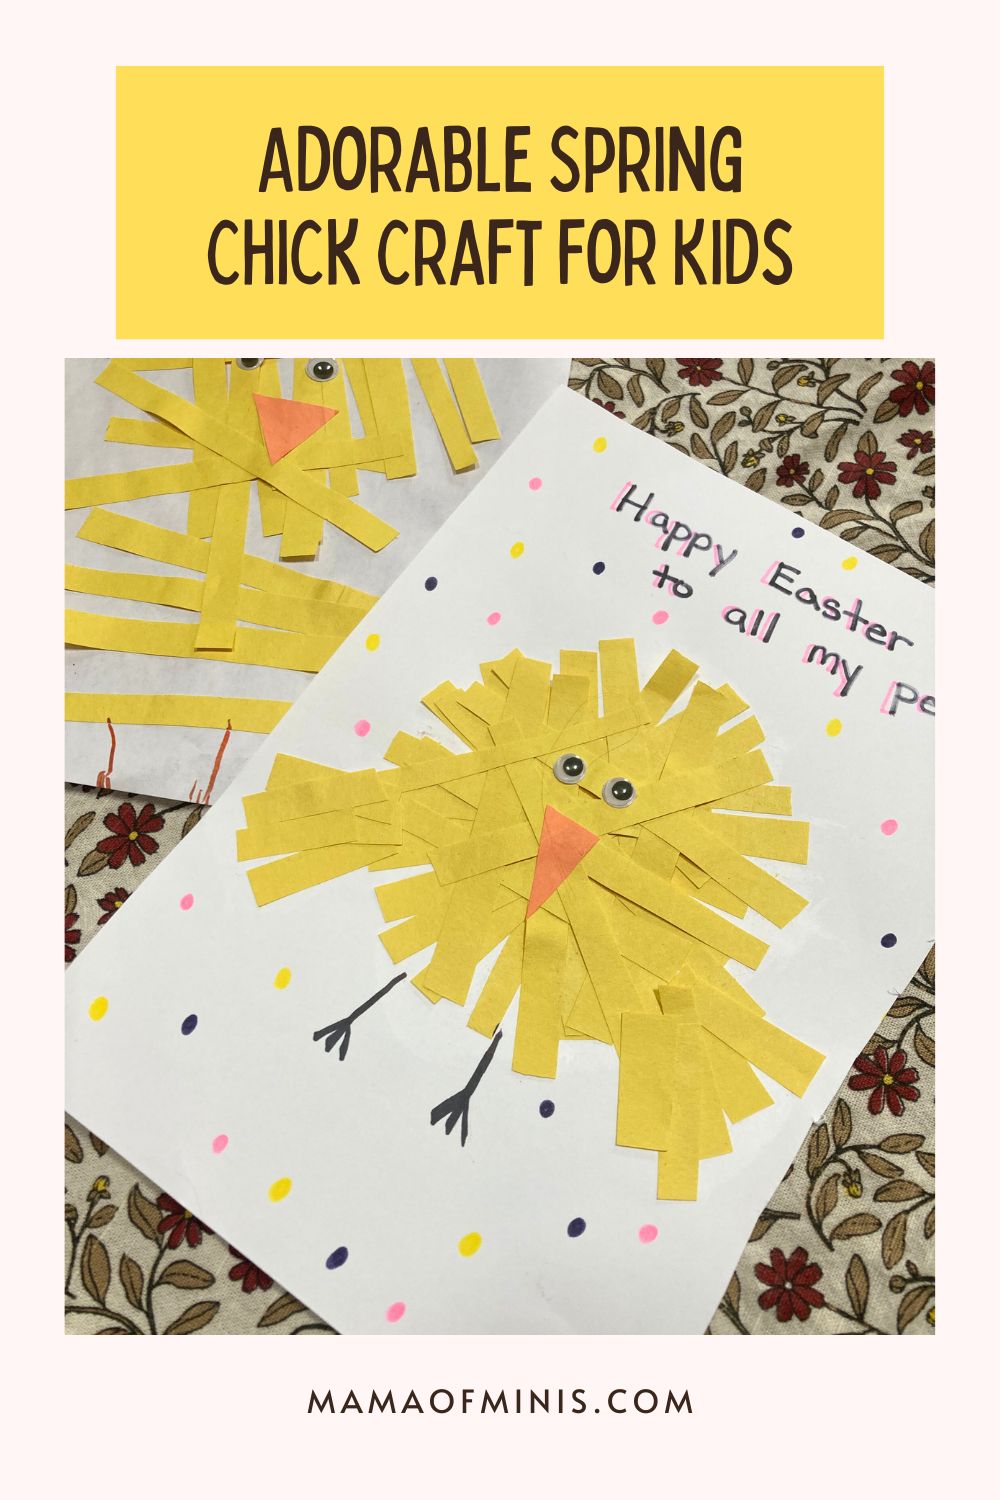 Adorable Spring Chick Craft for Kids